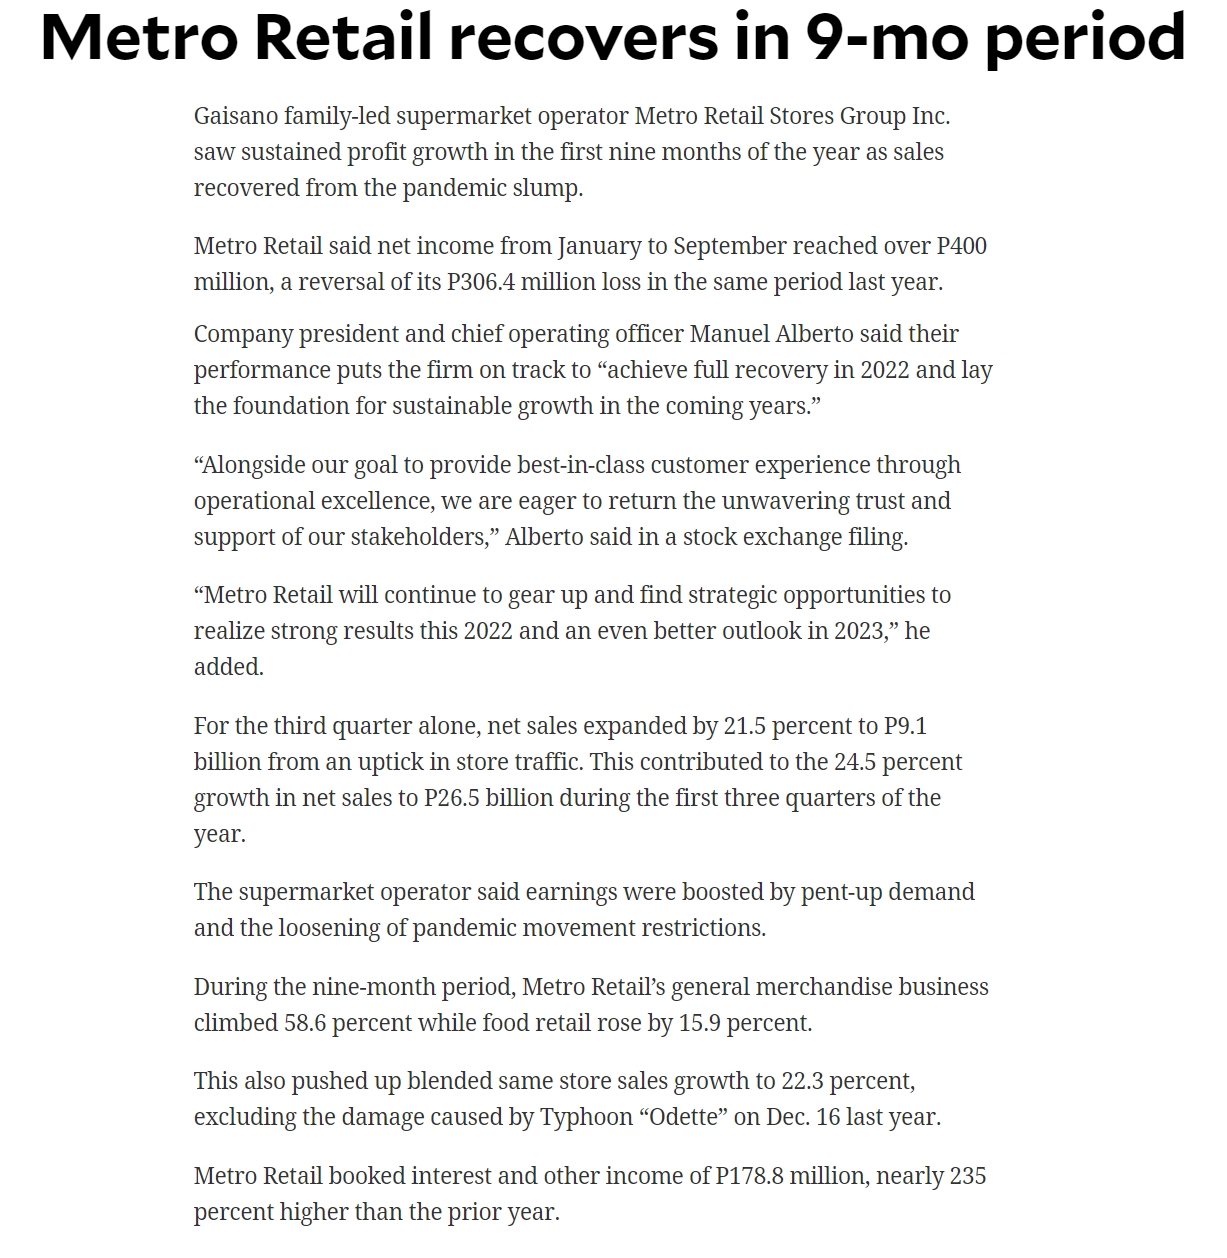 Metro Retail recovers in 9 mo period